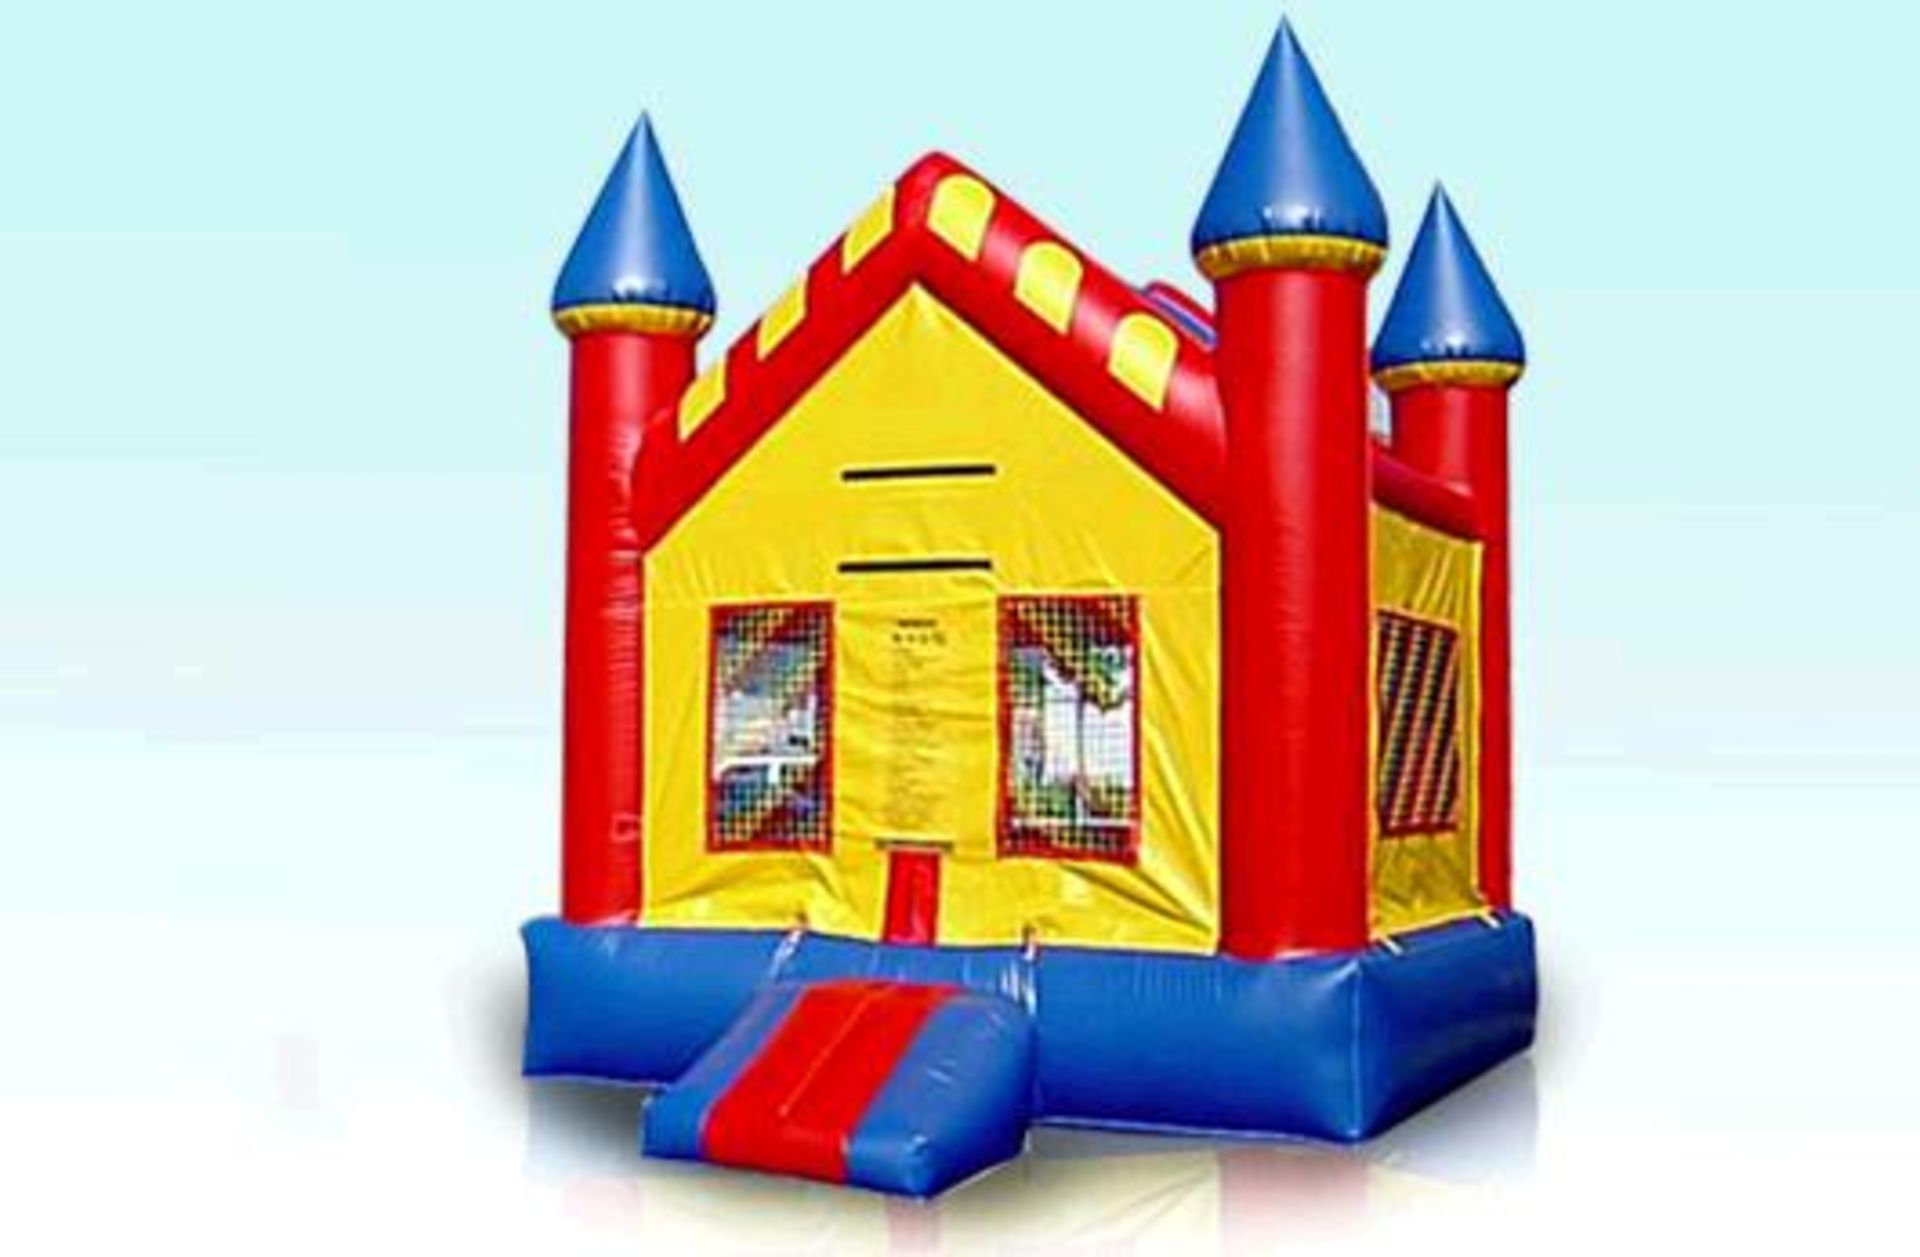 BOUNCE HOUSE TO GO - Image 2 of 2